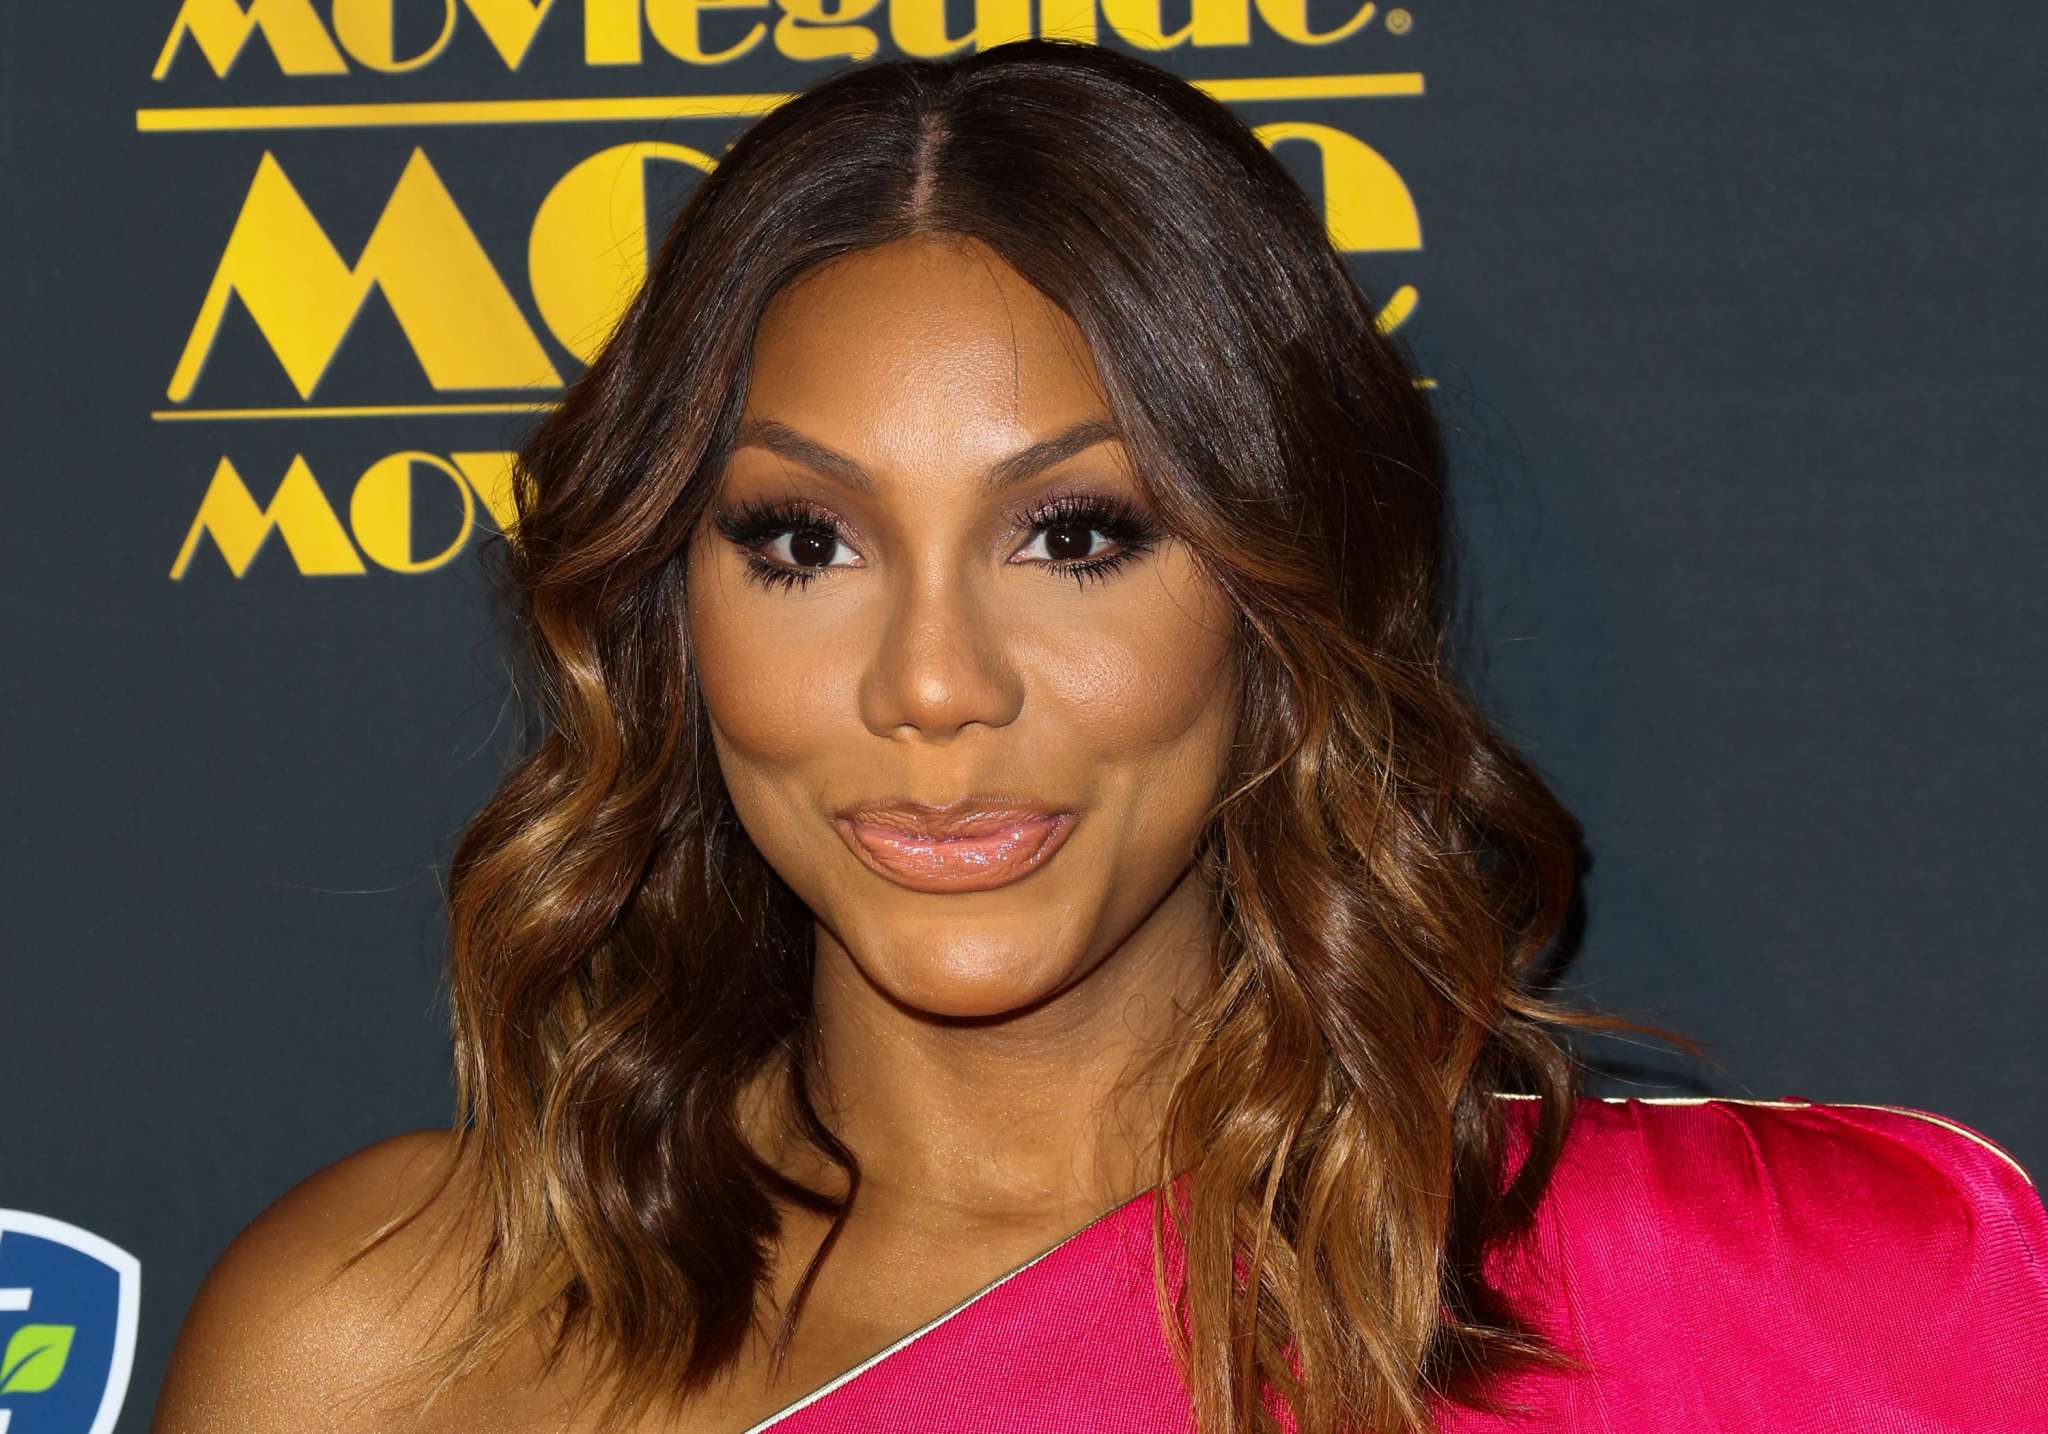 Tamar Braxton's Latest Video Has Fans Accusing Her Of Blasphemy - She Brings Up The Holy Ghost While Showing Off A Fashion Nova Outfit